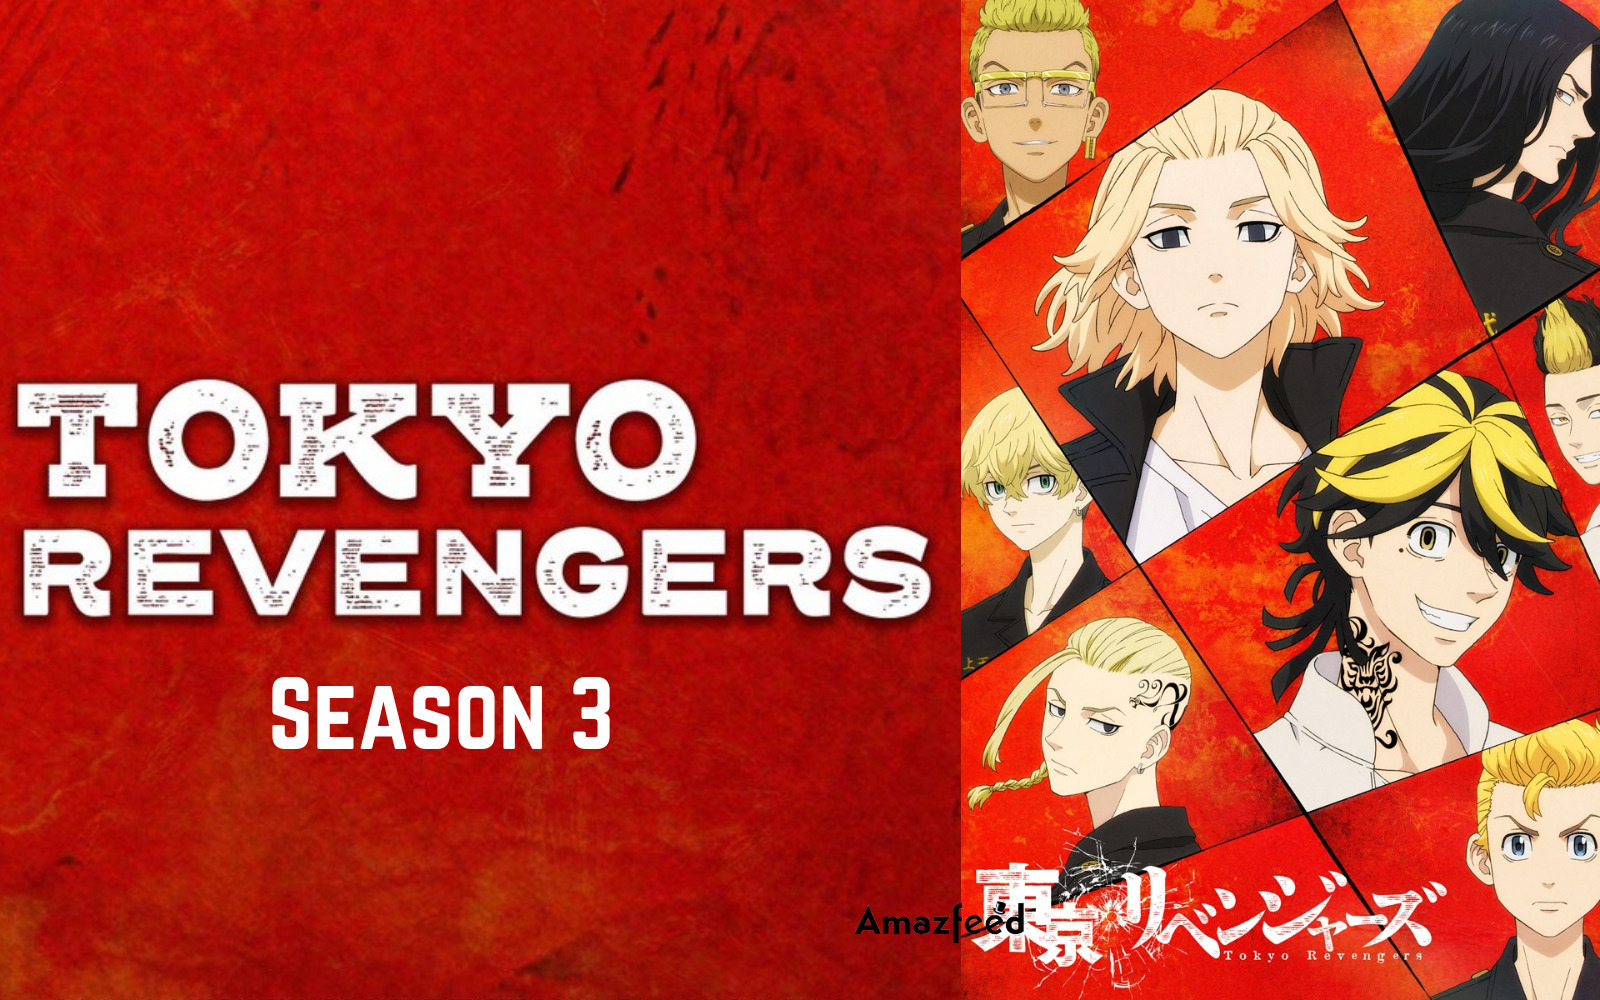 Tokyo Revengers Season 2 episode guide, release dates, time, plotlines &  where to watch